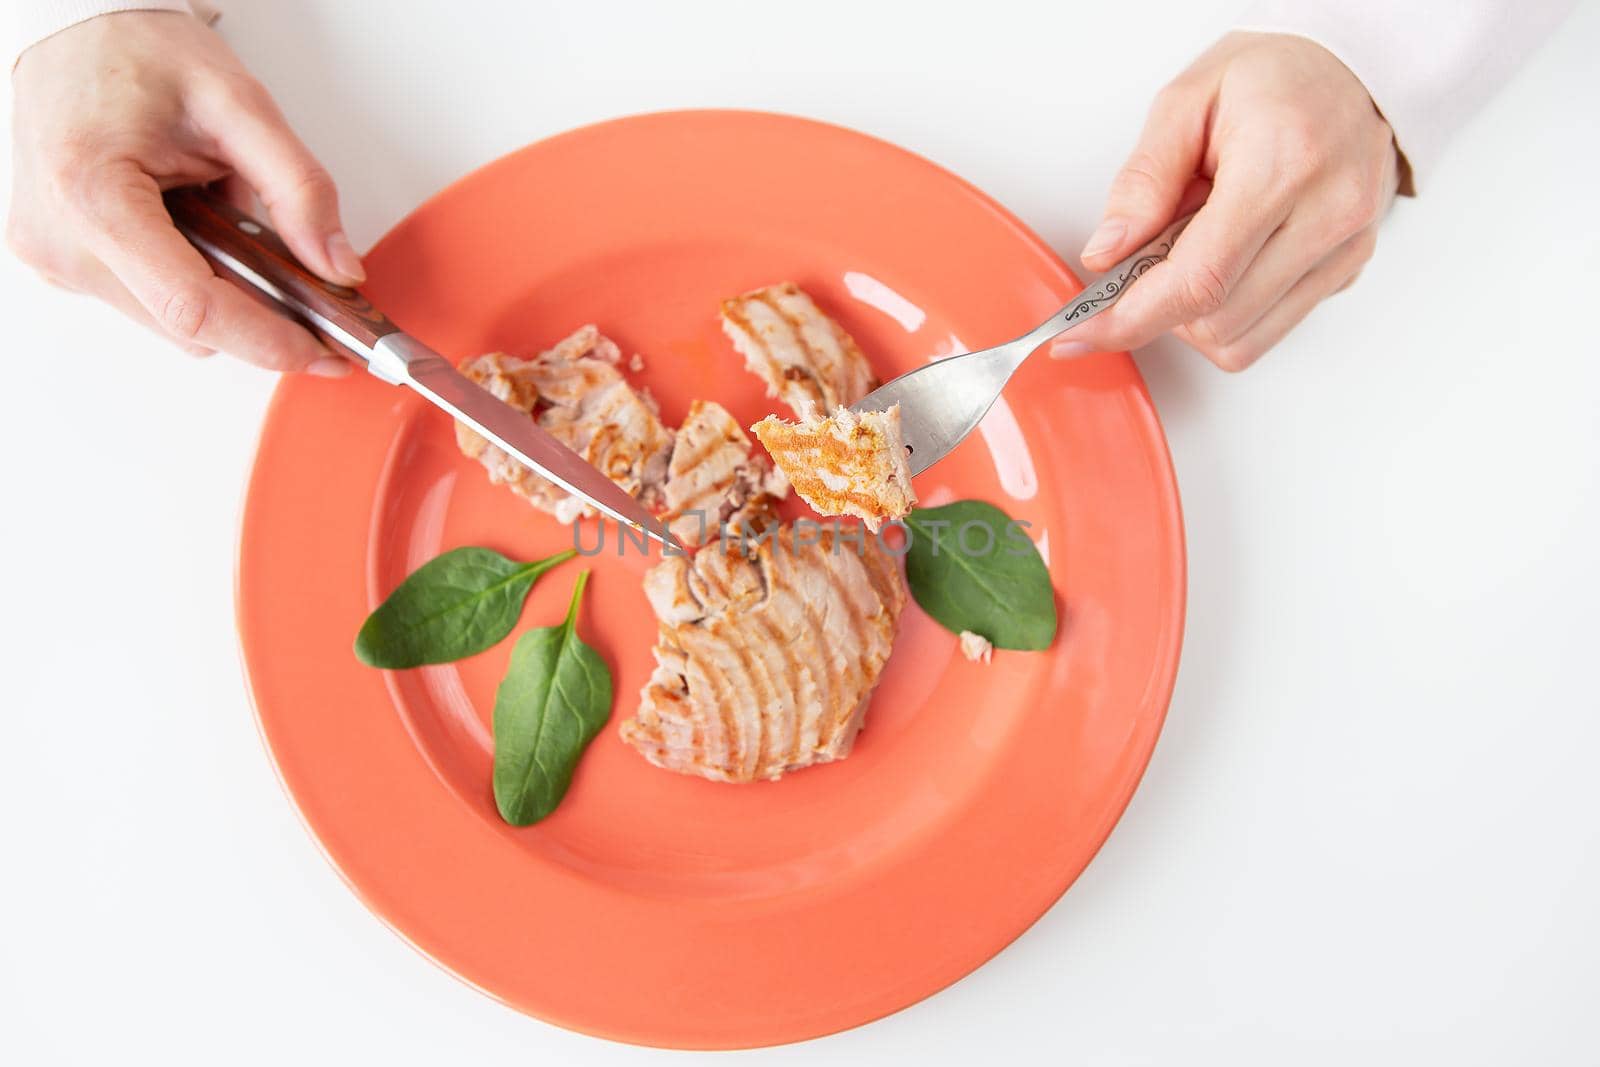 Close-up shot of a juicy delicious grilled tuna steak on a bright coral plate. Delicious and healthy food, proper nutrition. The girl is holding a fork and knife. View from above. by sfinks